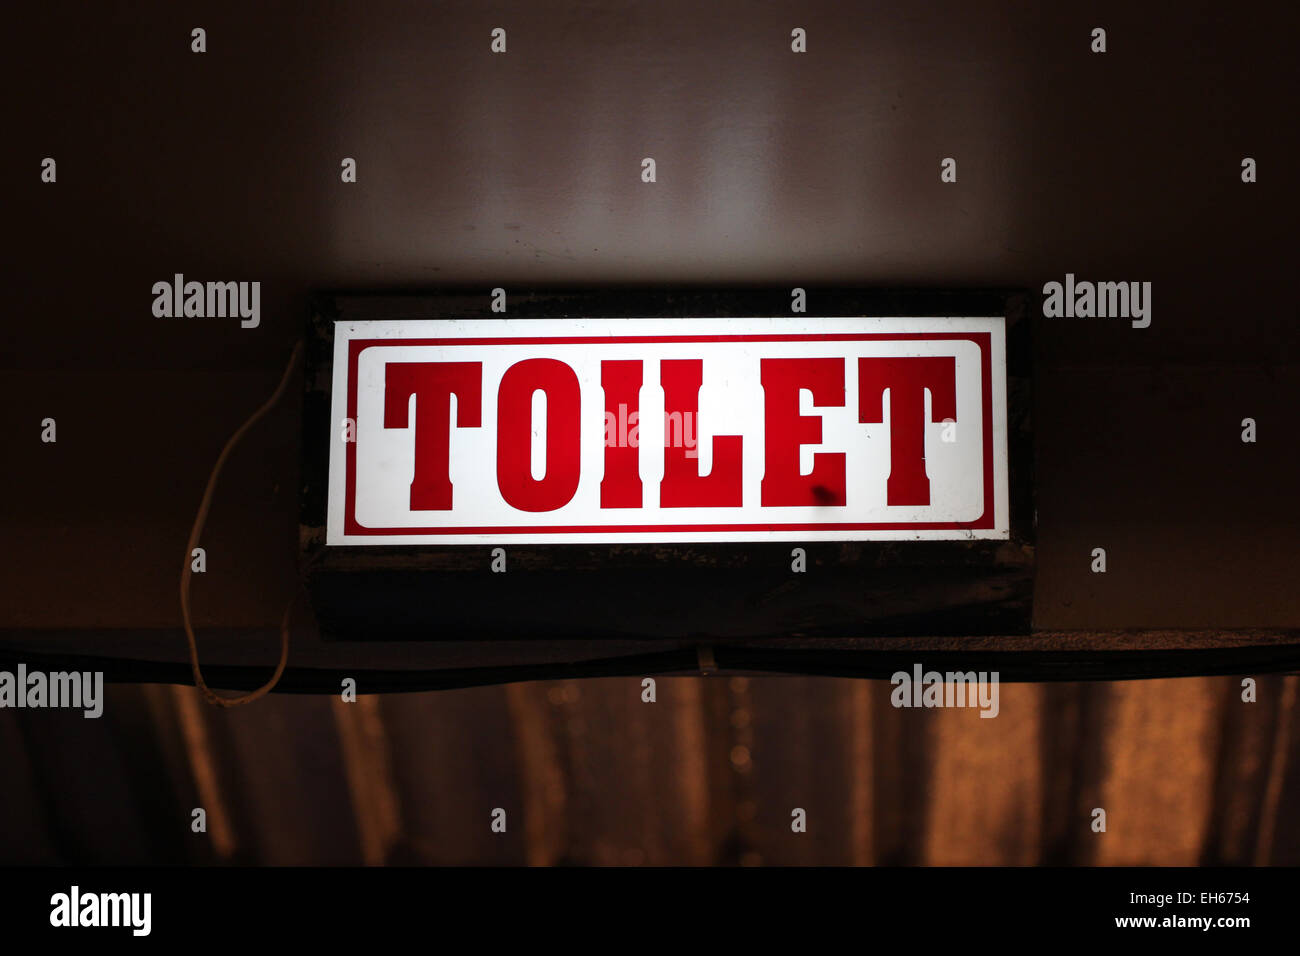 LED signs provide directional to the toilet. Stock Photo